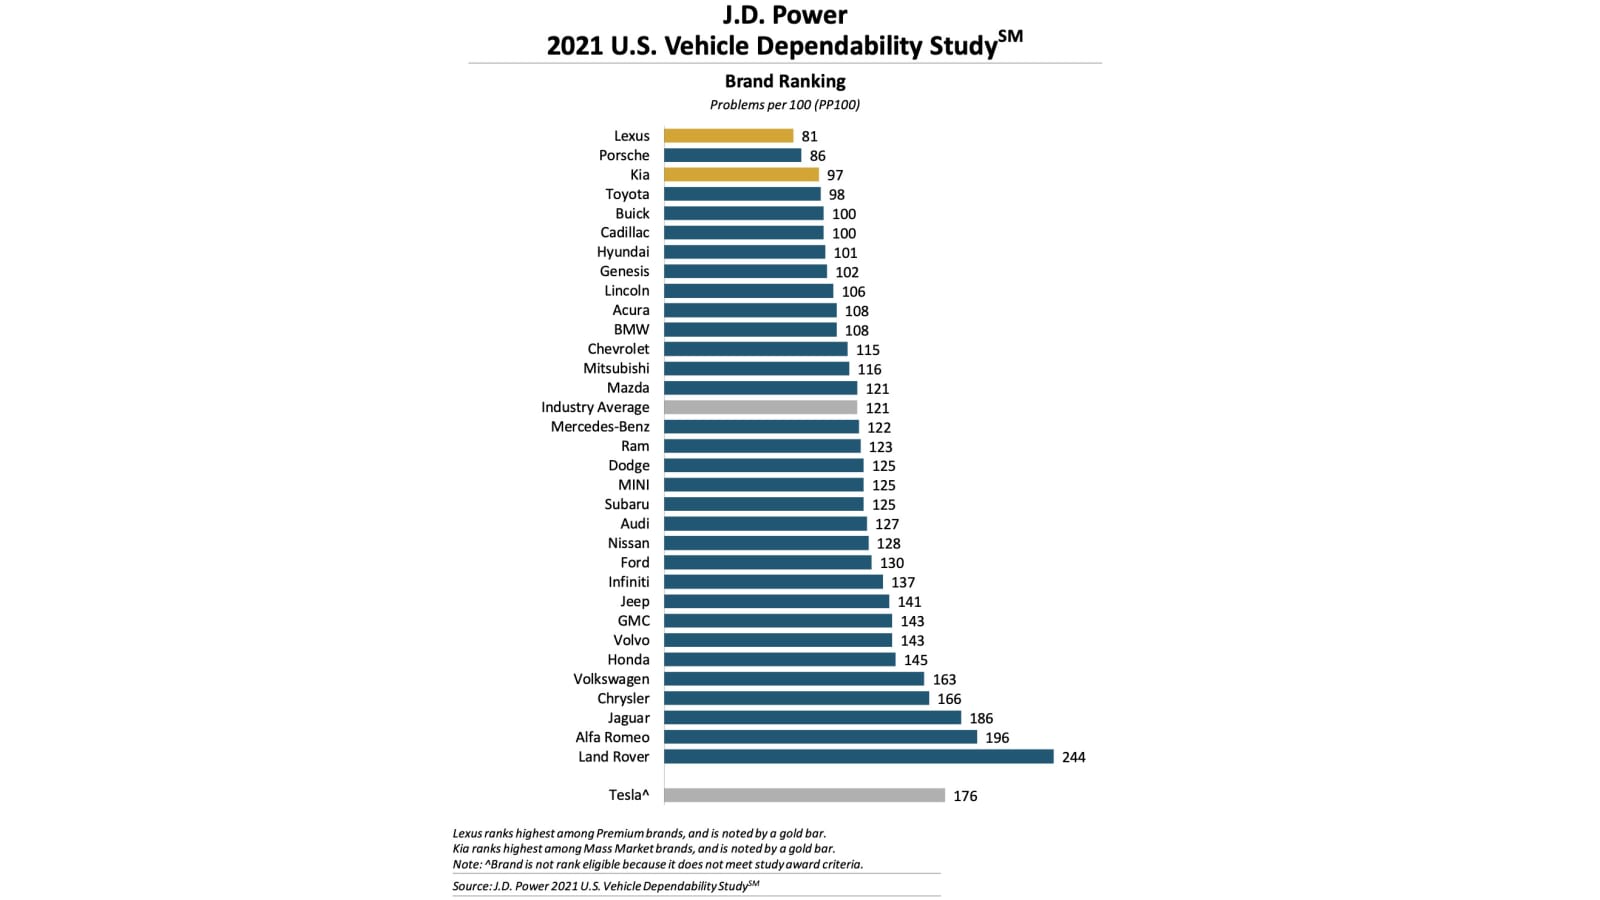 Lexus leads in vehicle dependability while Land Rover falters - Autoblog